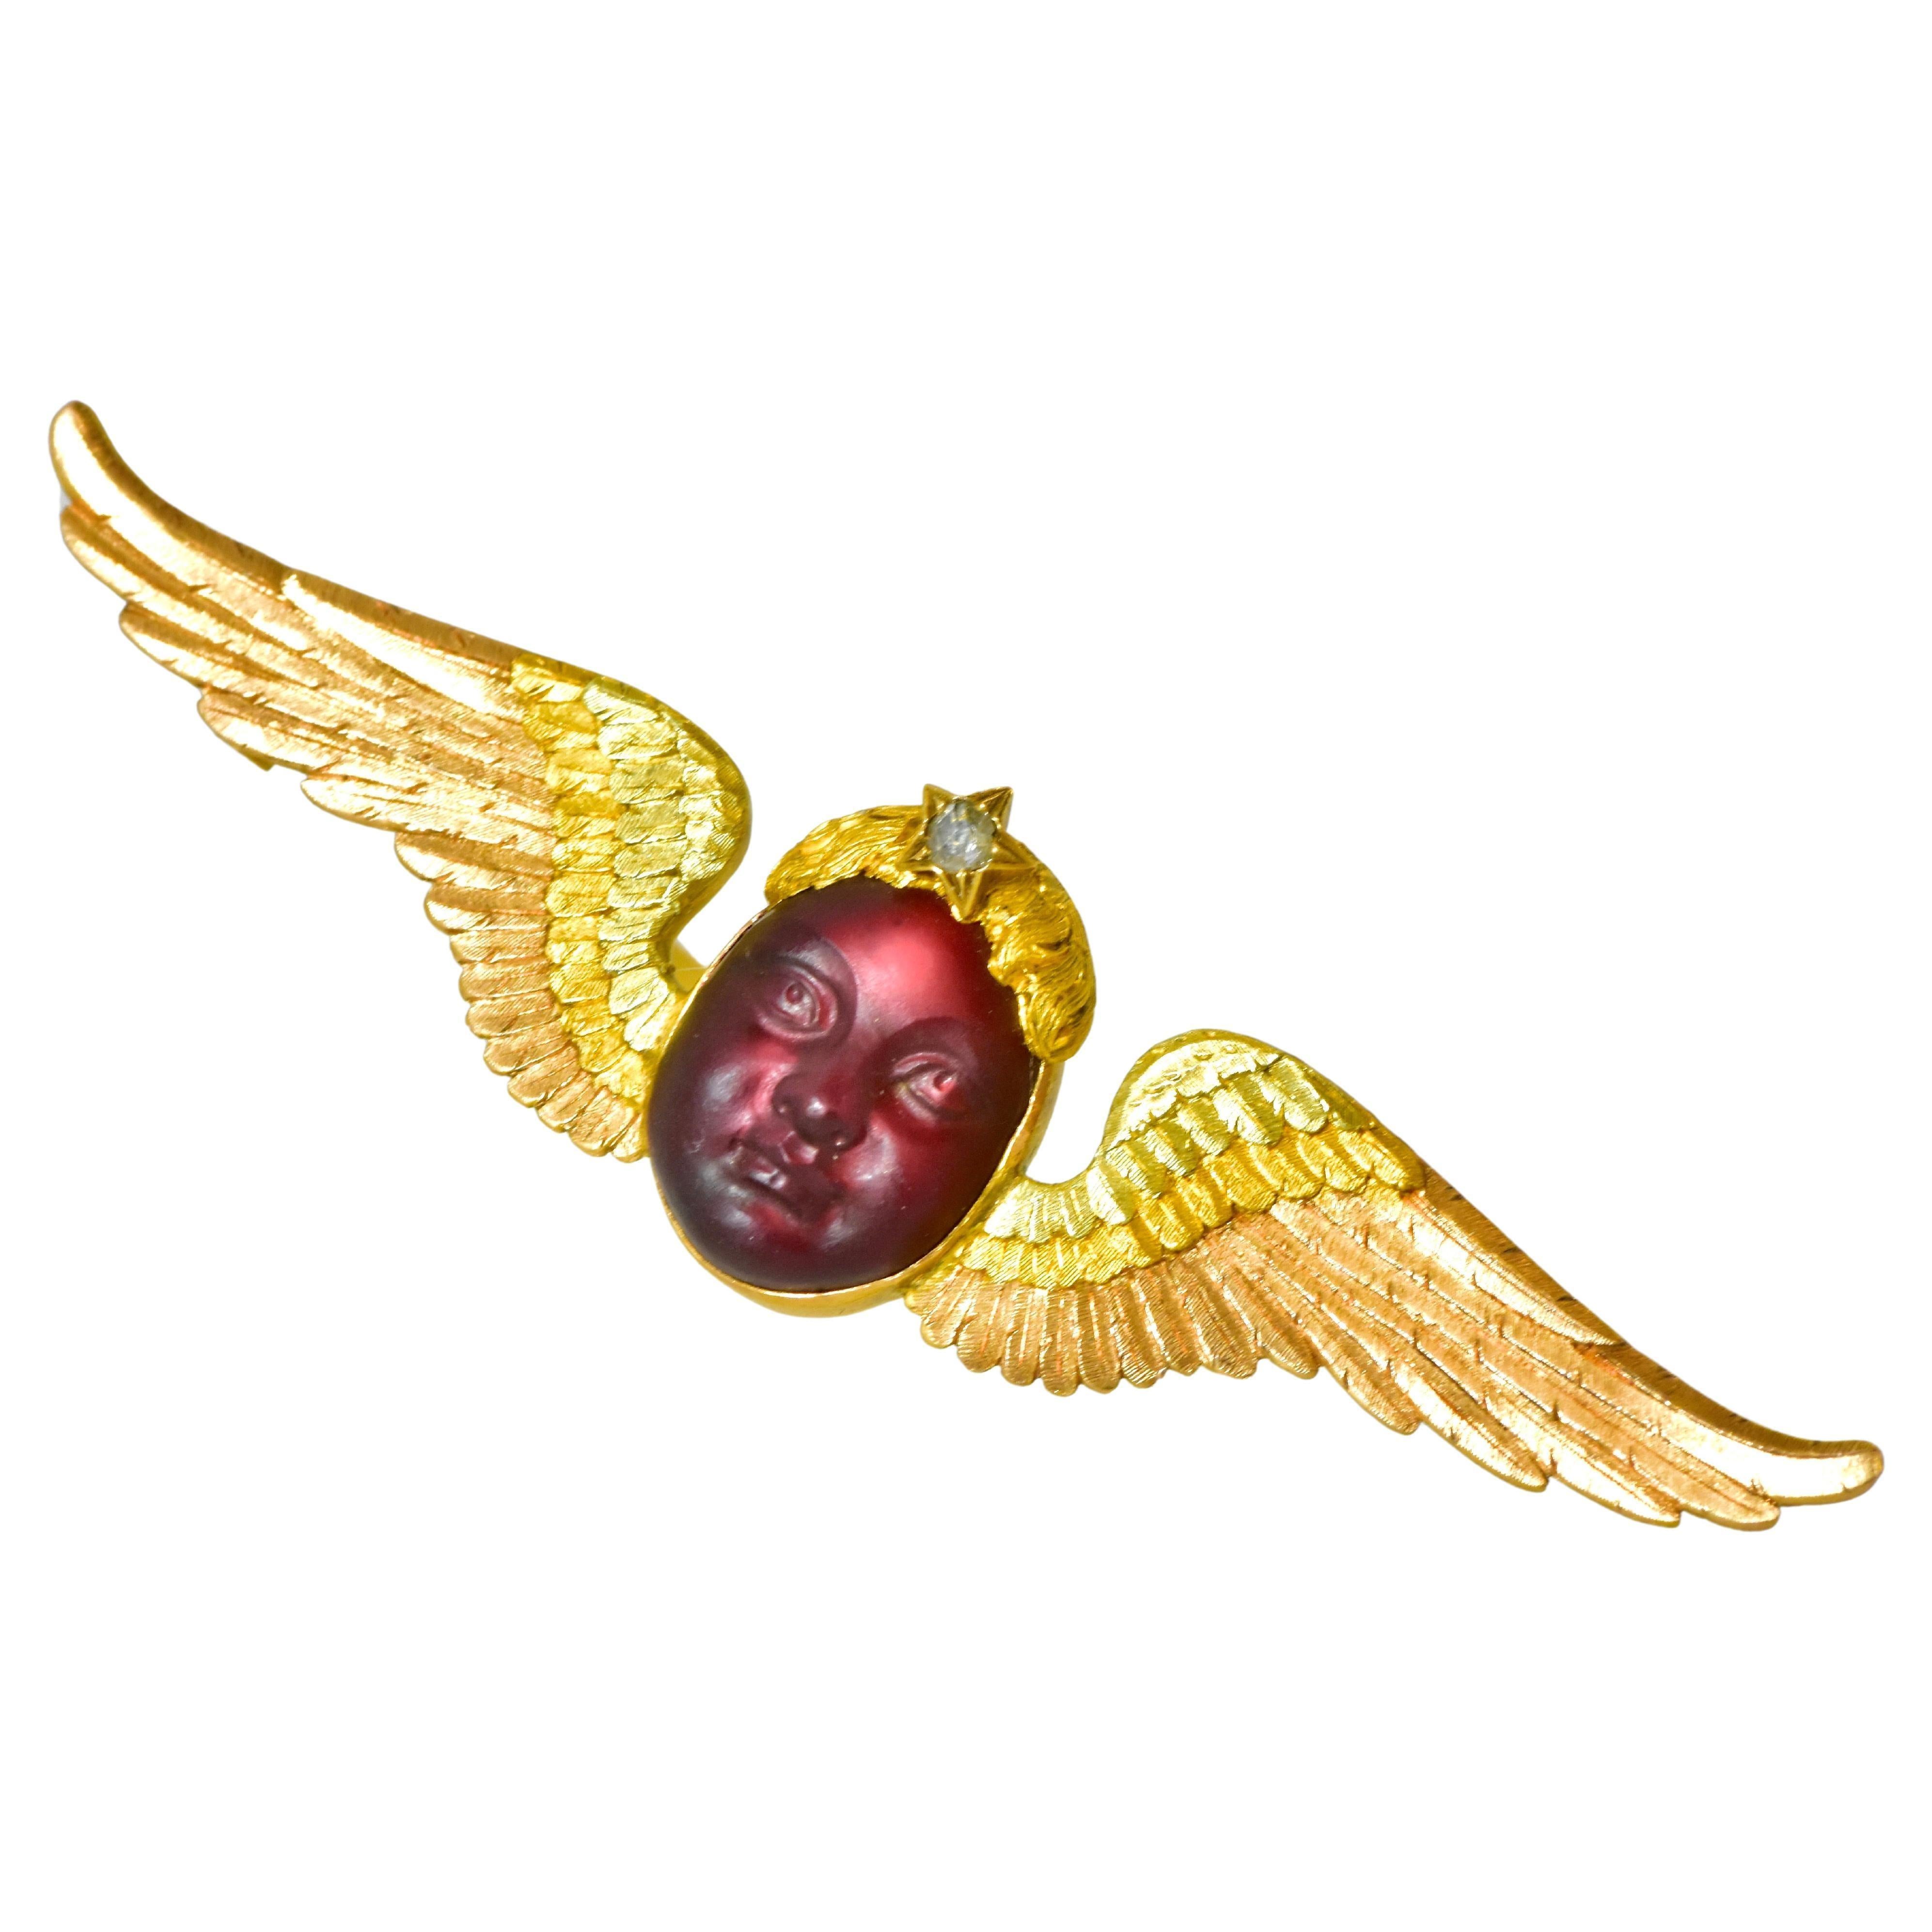 Antique 18K carved garnet of an ethereal representation of a cherub or an enfant. The work is quite three dimensional, right down to its star motif rose cut diamond in the hair. The finely etched wings are in three colors of gold - yellow, pink and